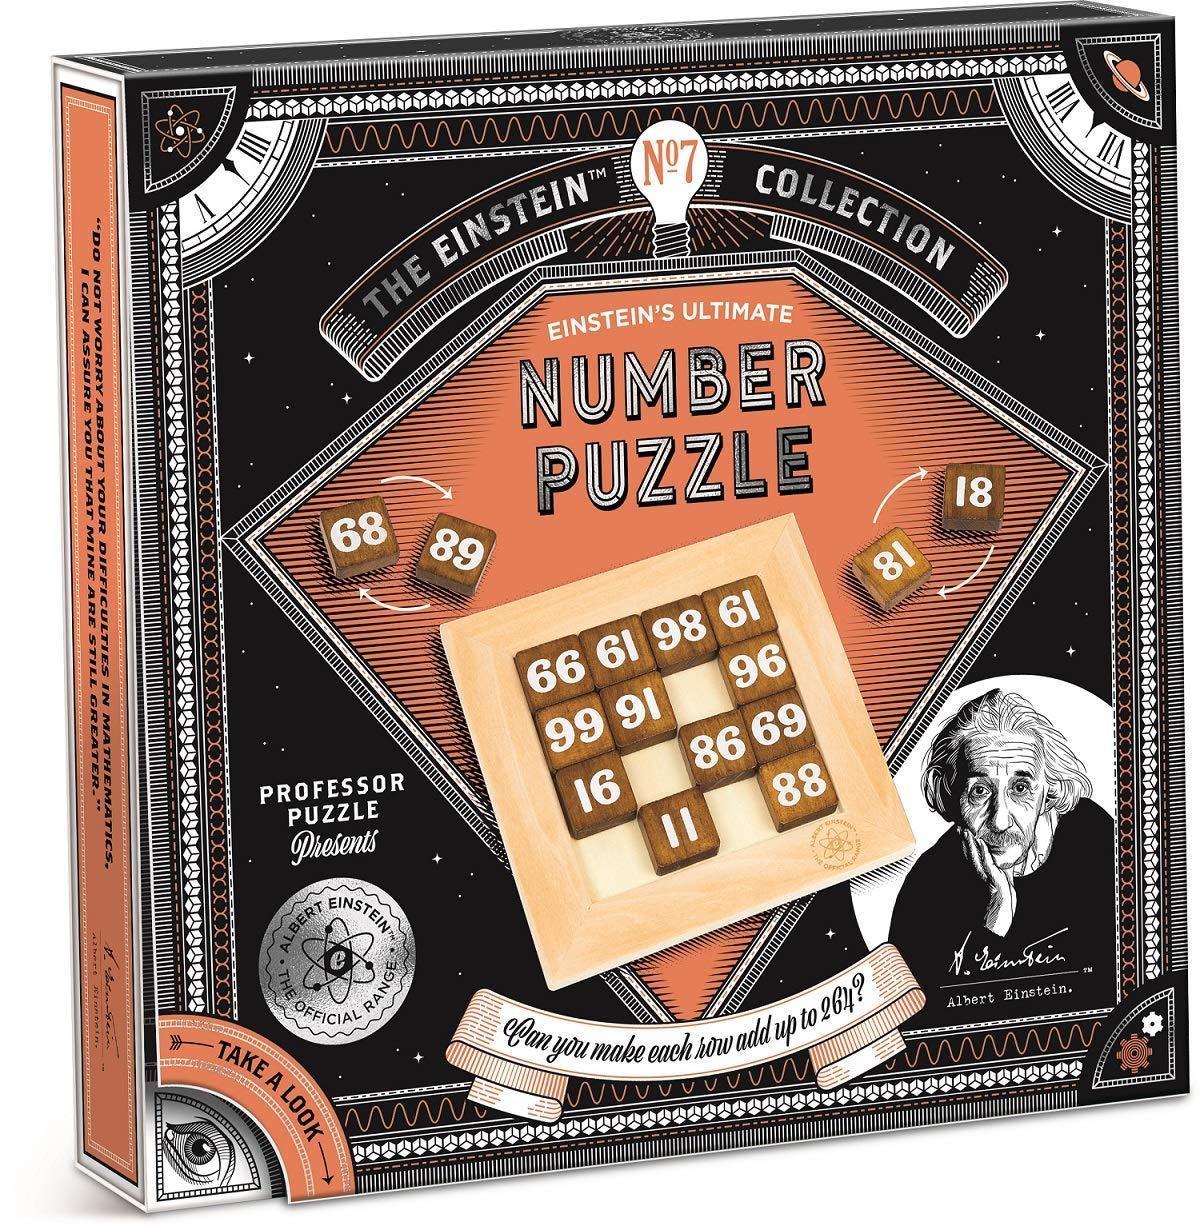 Puzzle - The Einstein Collection - Number Puzzle | Professor Puzzle image0